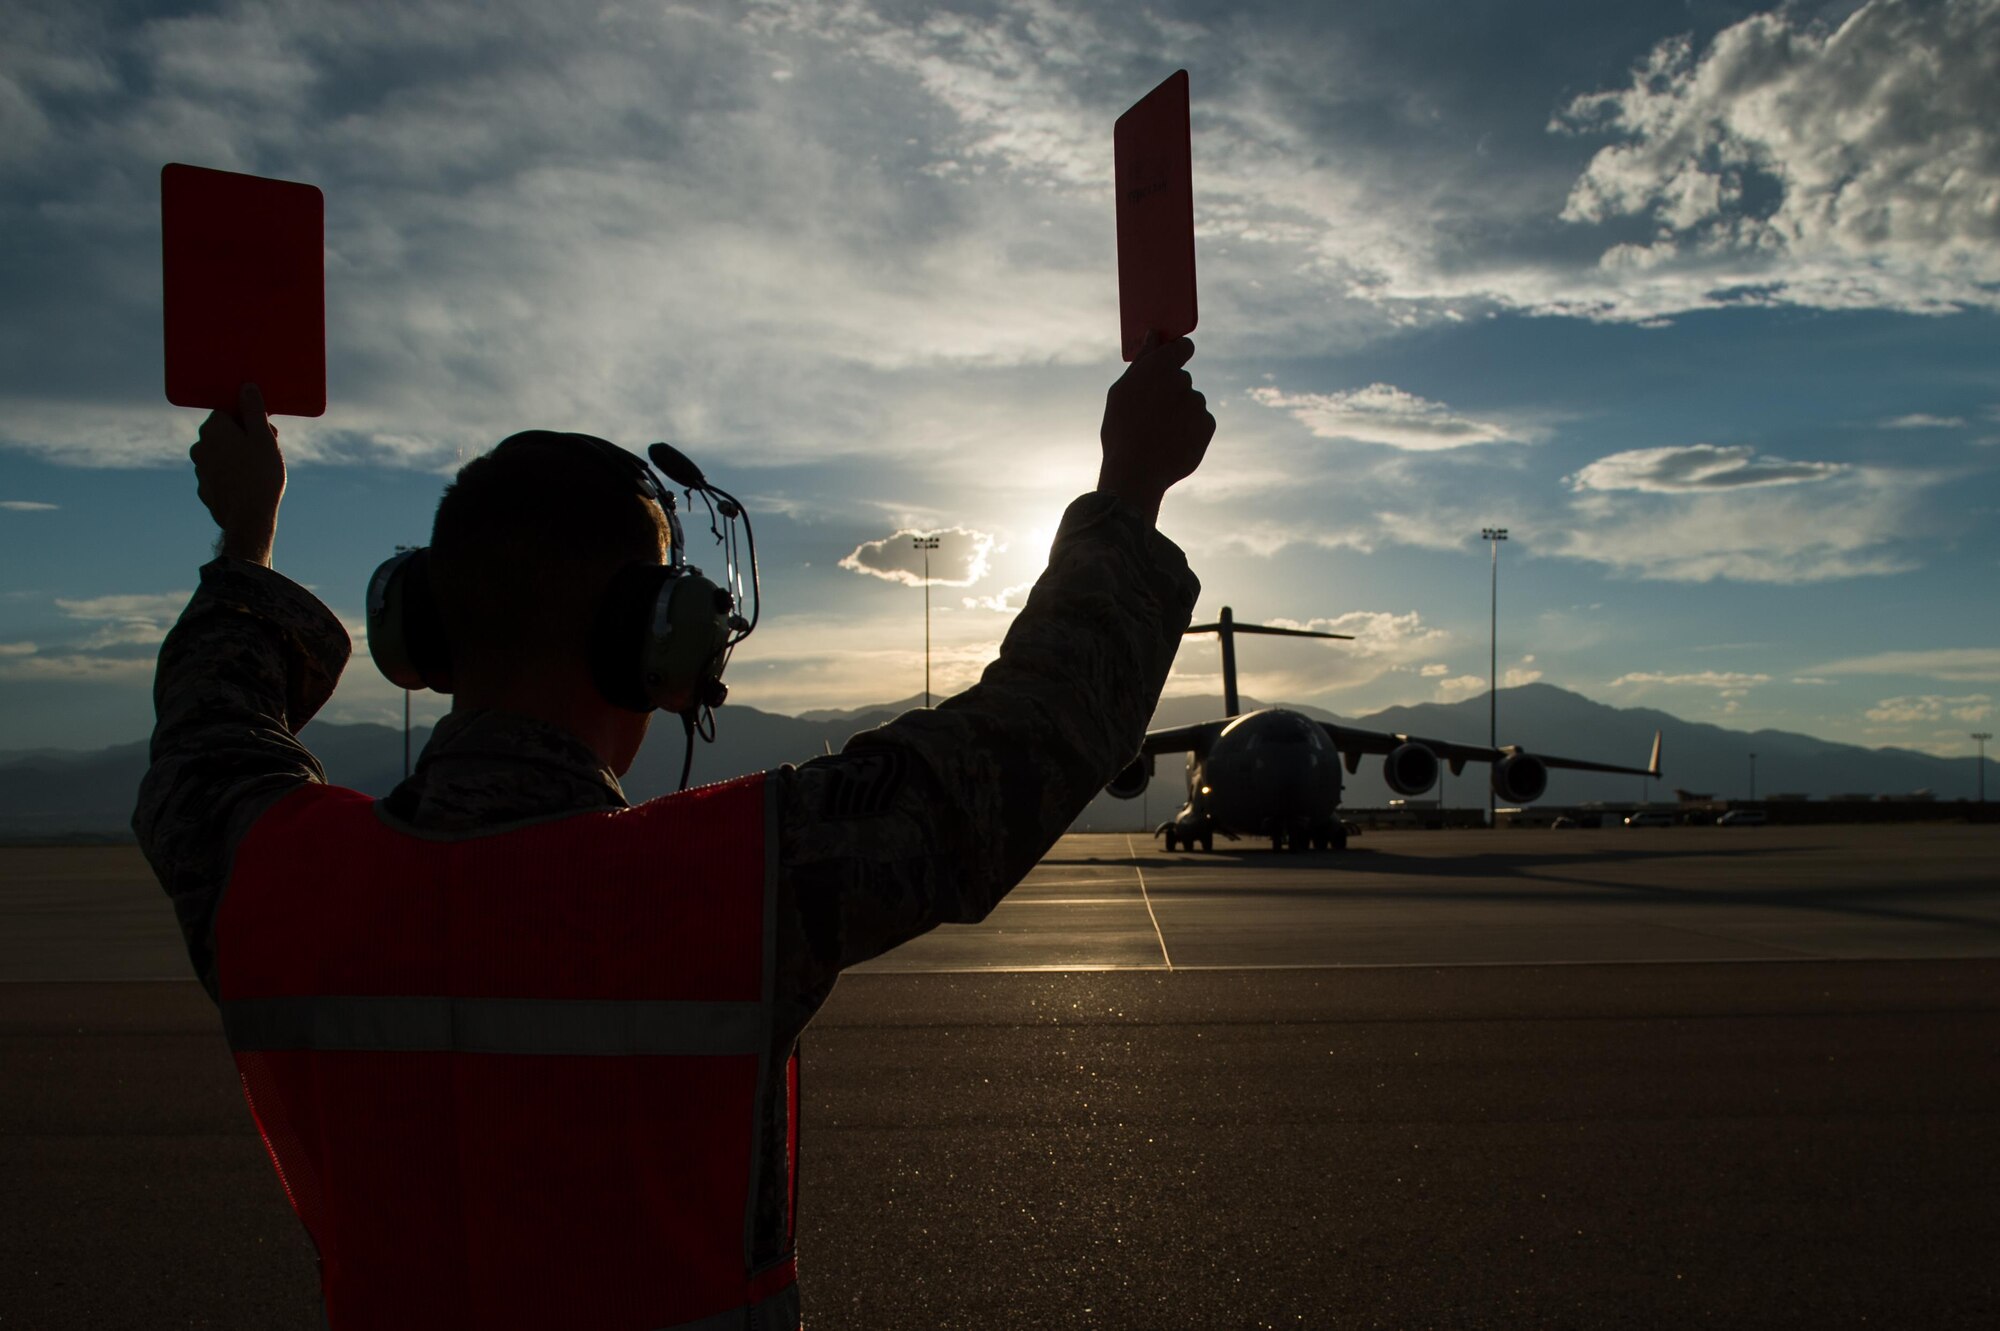 U.S. Air Force Tech. Sgt. Joshua Kasper, 821st Contingency Response Squadron aerospace maintenance supervisor, marshalls a C-17 Globemaster III aircraft during Exercise Cerberus Strike 16-02 at the Fort Carson Air Terminal, Colo., Sept. 11, 2016. C-Strike is a joint exercise where contingency response forces rehearse potential real-world situations by training with Army counterparts in cargo uploading and downloading on aircraft, aircraft engine running off-loads, communications, aerial port procedures, and air mobility liaison officer operations with airdrops from aircraft. (U.S. Air Force photo by Master Sgt. Joseph Swafford)